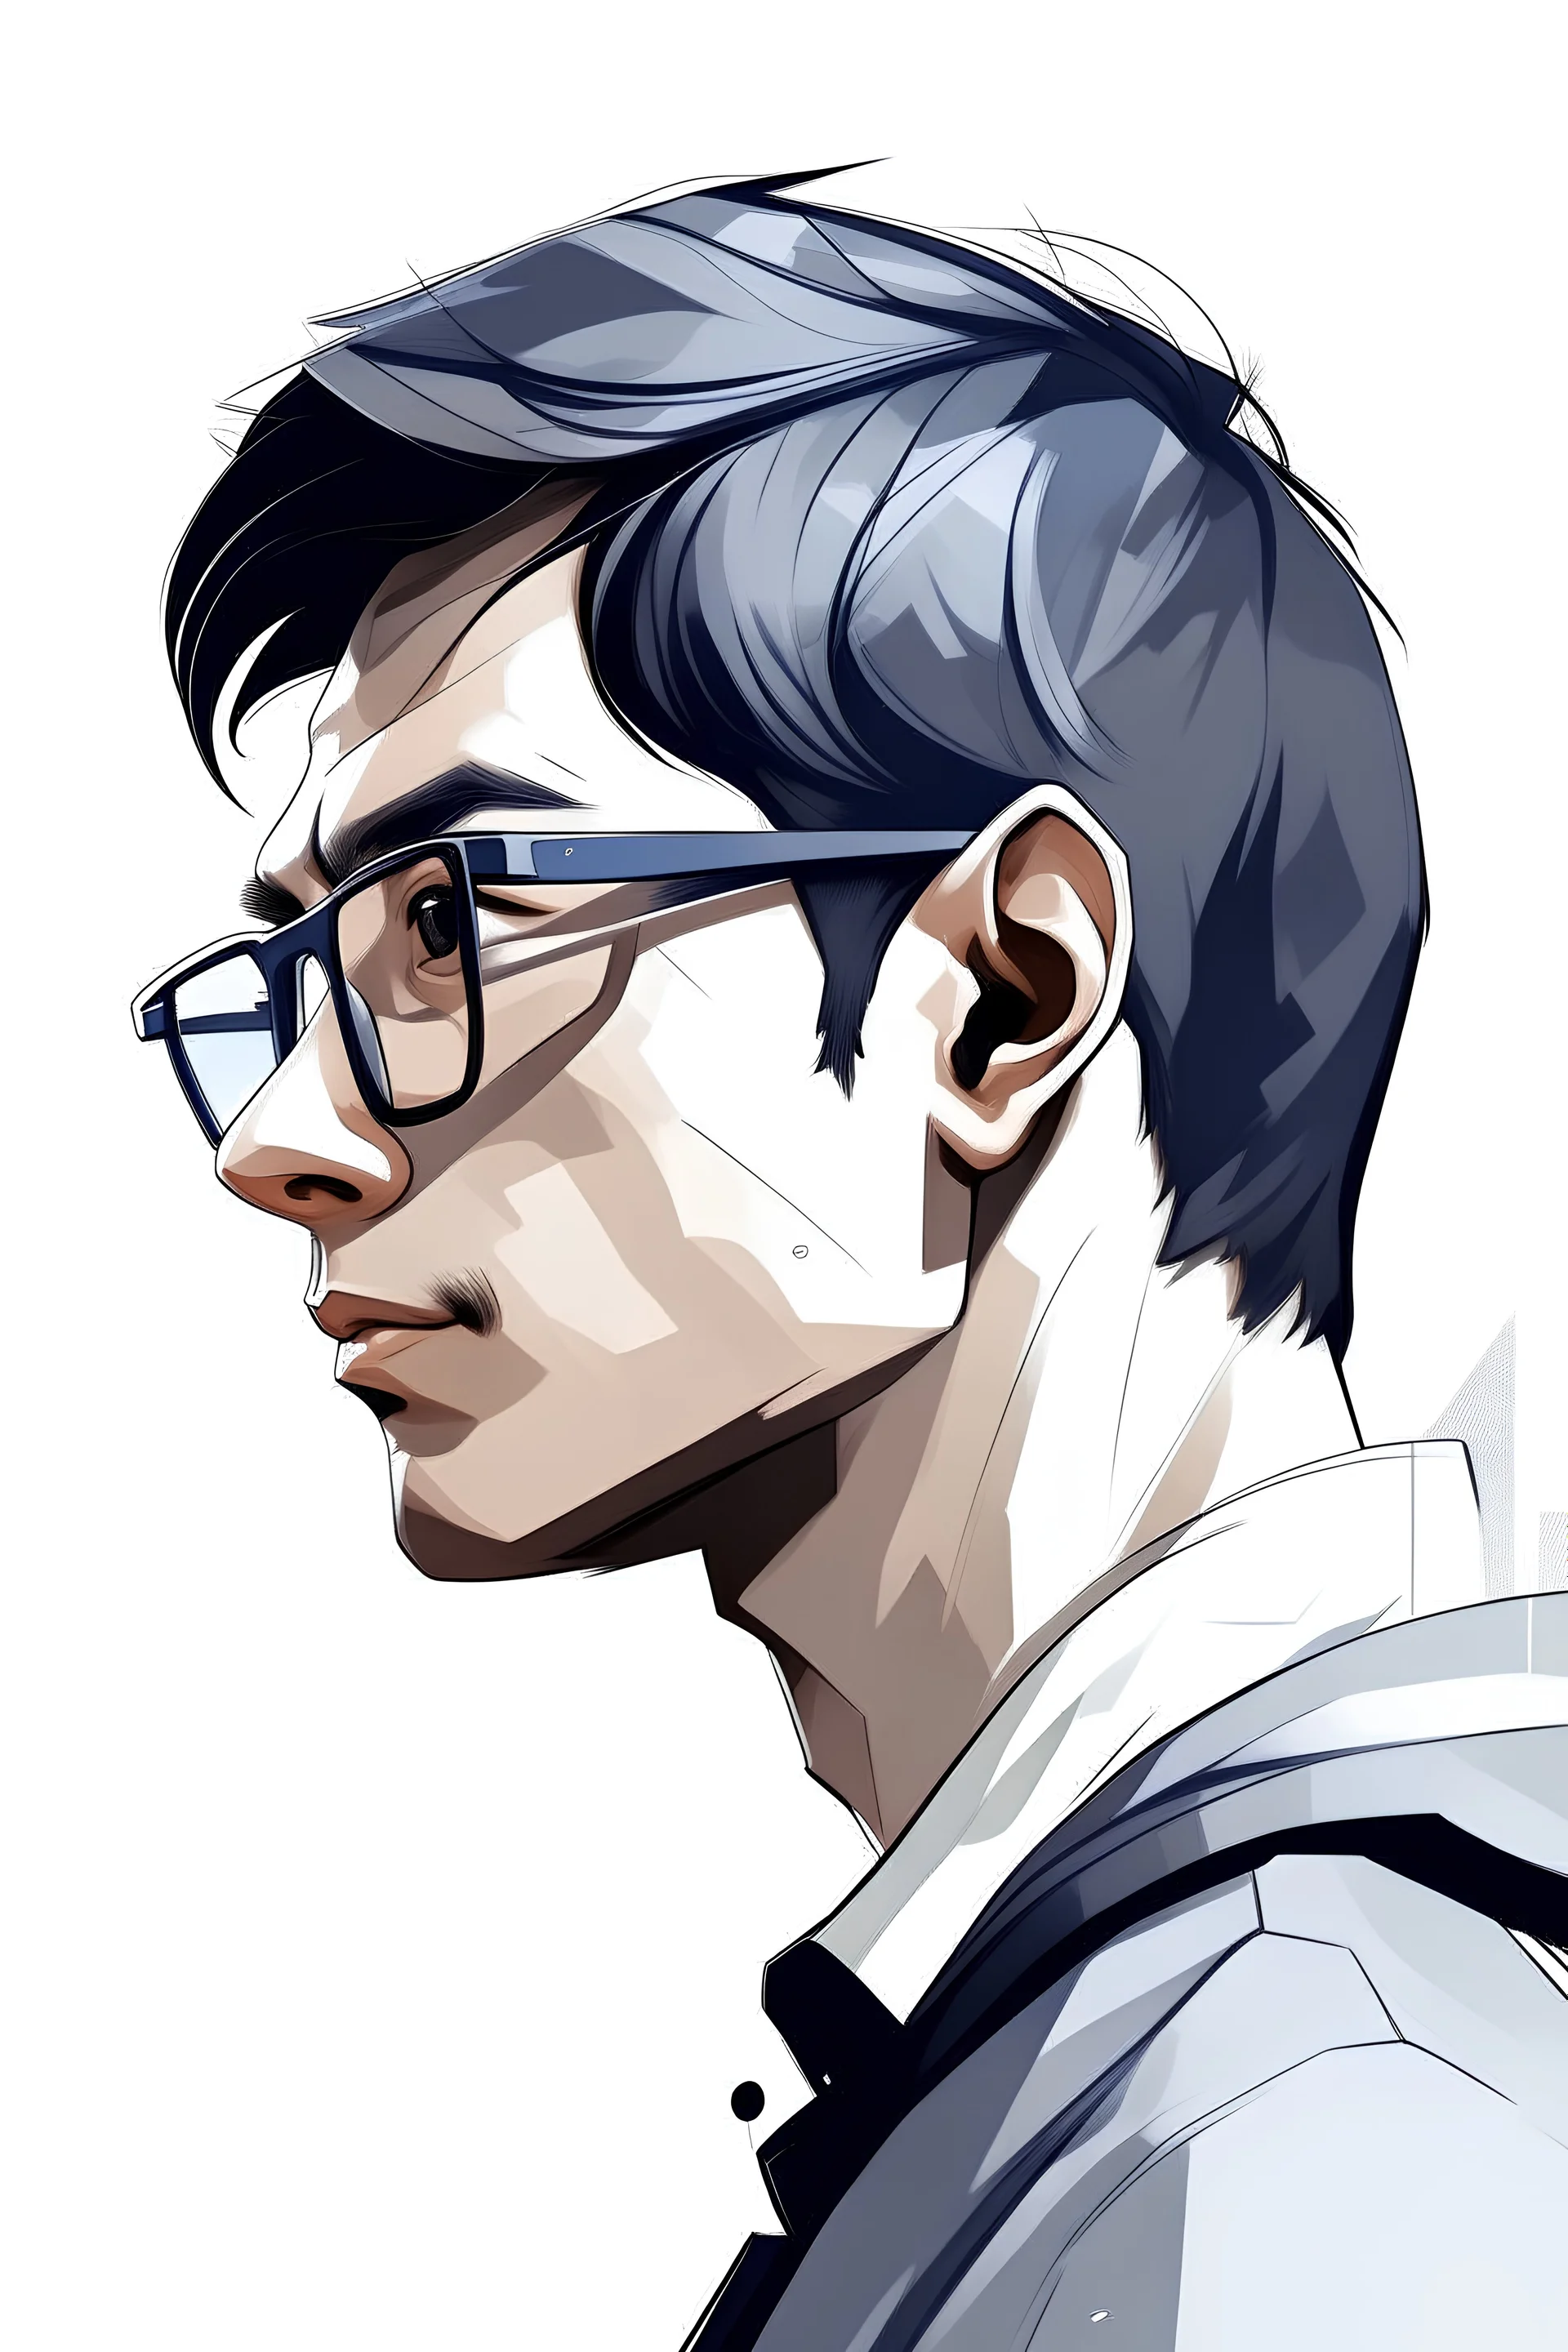 A developer wearing glasses, digital art, profile picture, anime face, left profile view, Indian ethnicity, ,white background.